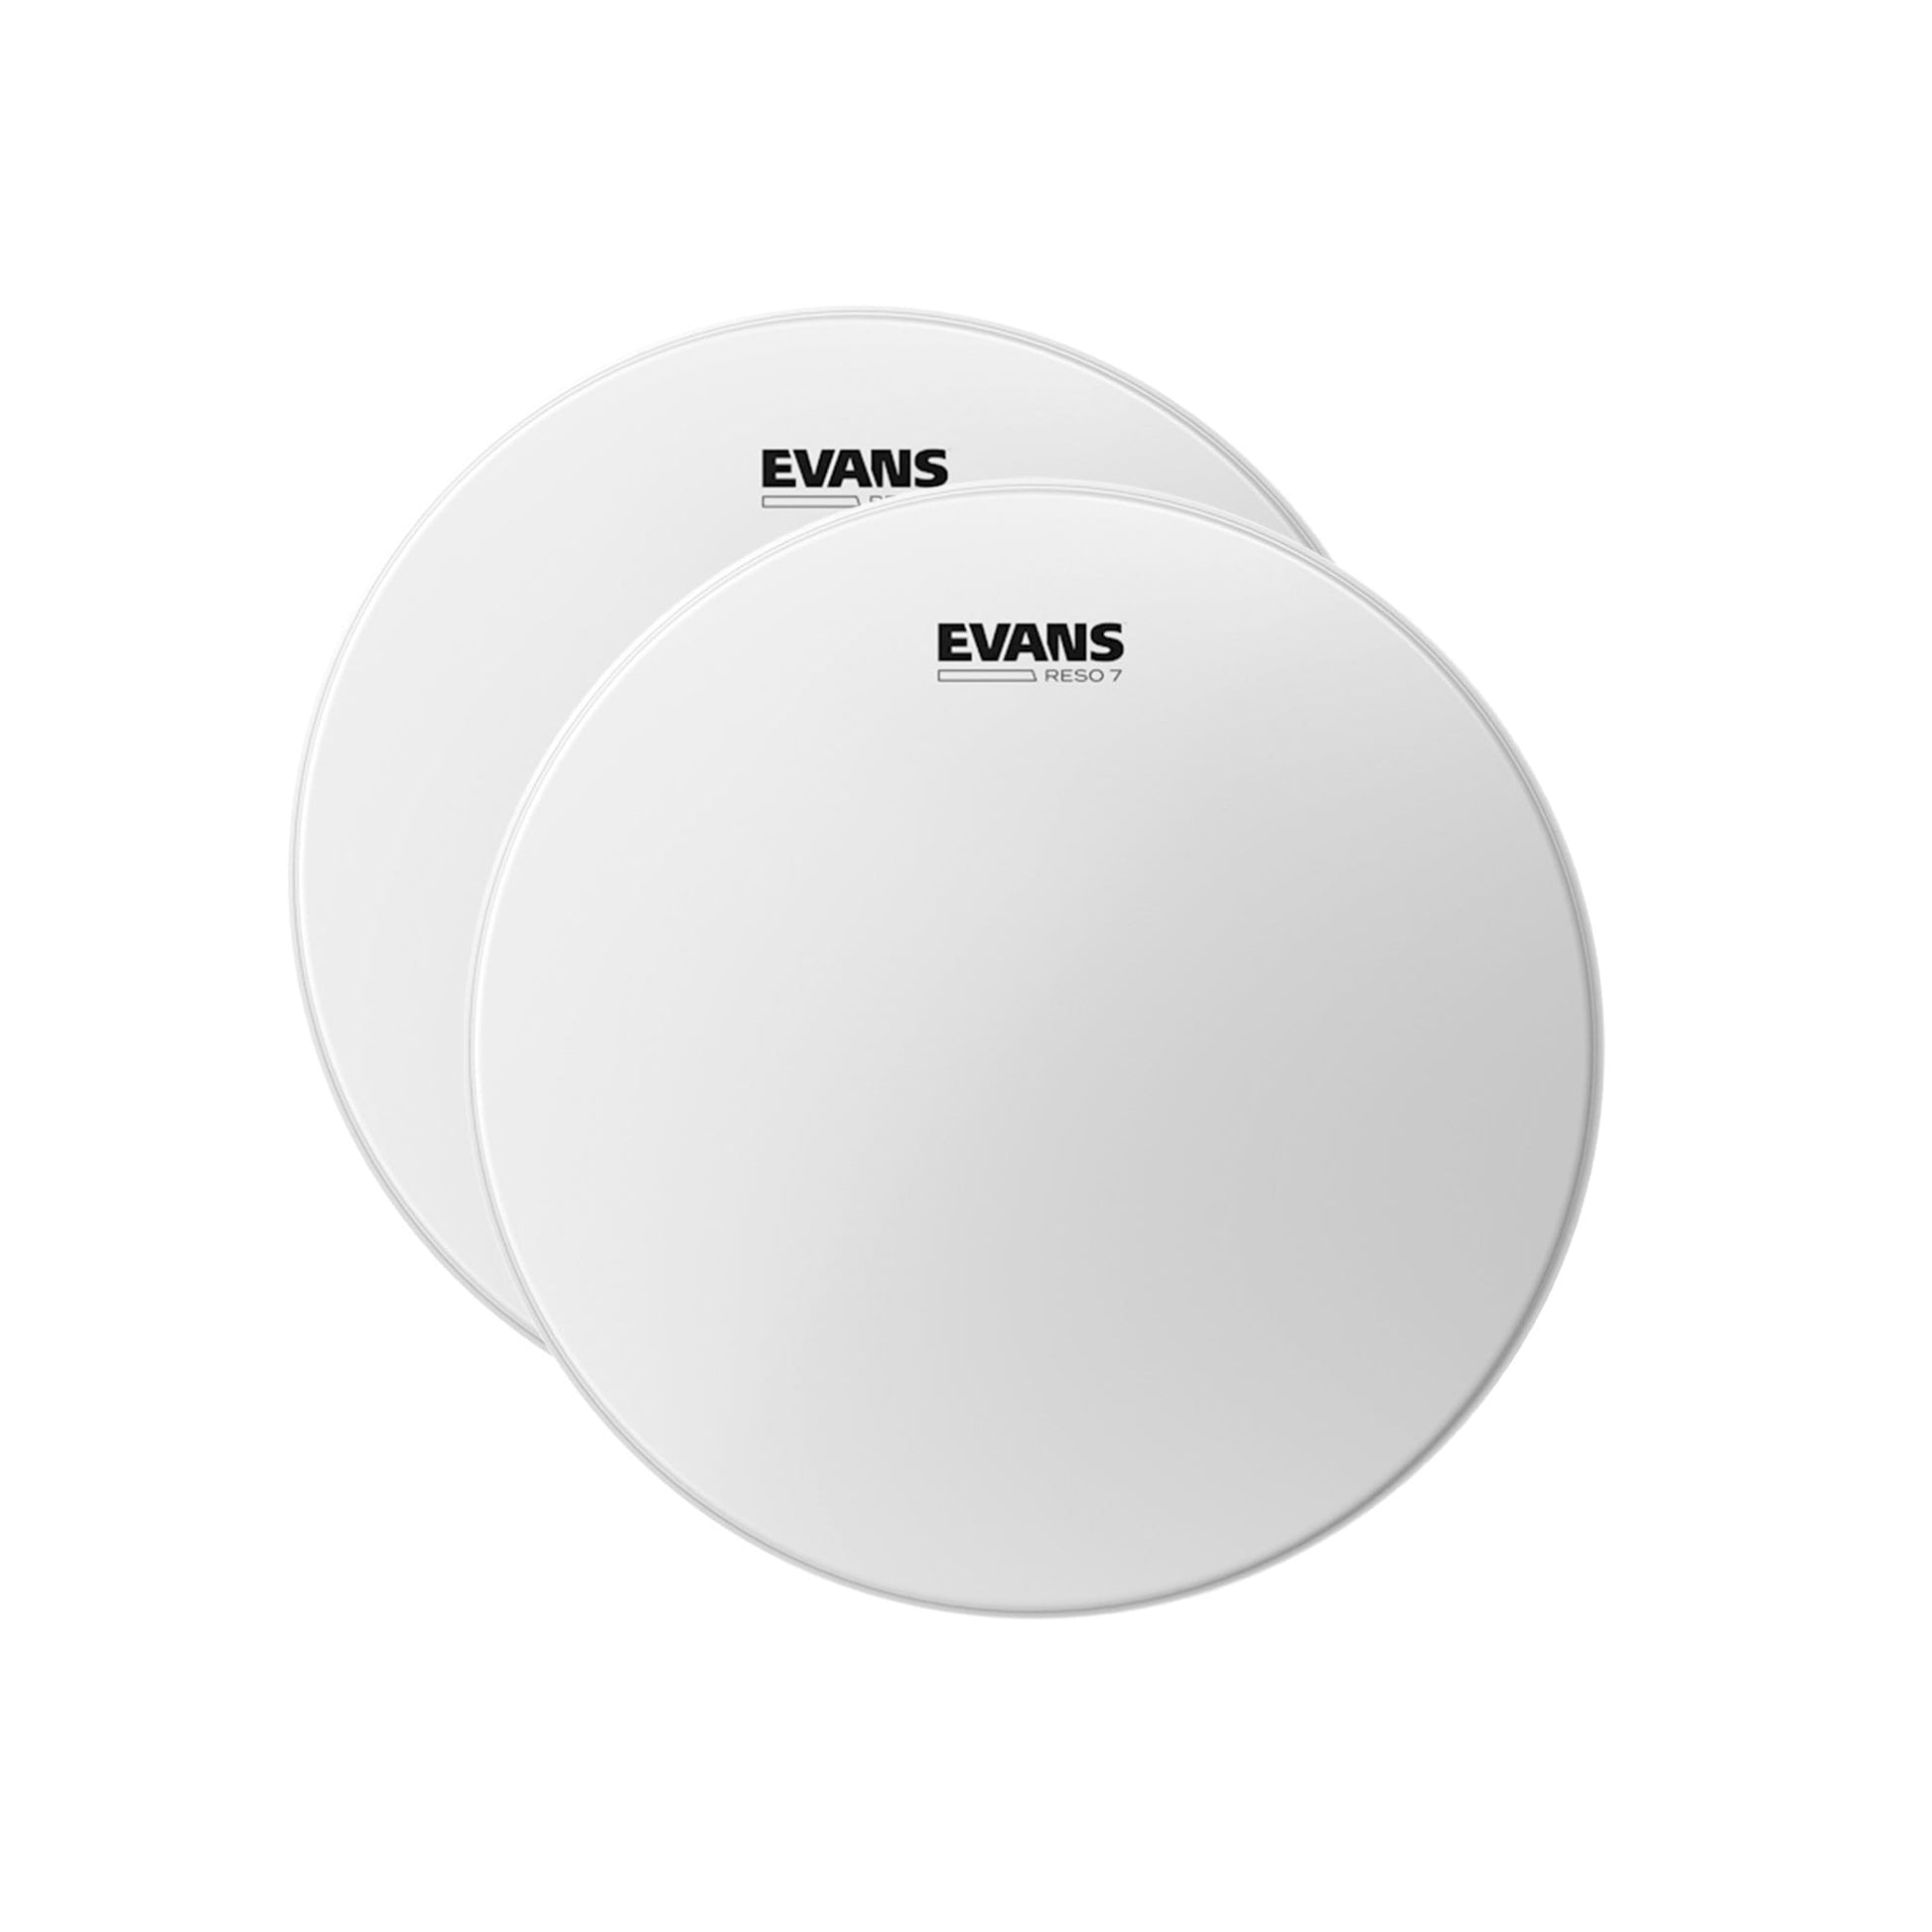 Evans 14" RESO 7 Coated Resonant Tom Drum Head (2 Pack Bundle) Drums and Percussion / Parts and Accessories / Heads